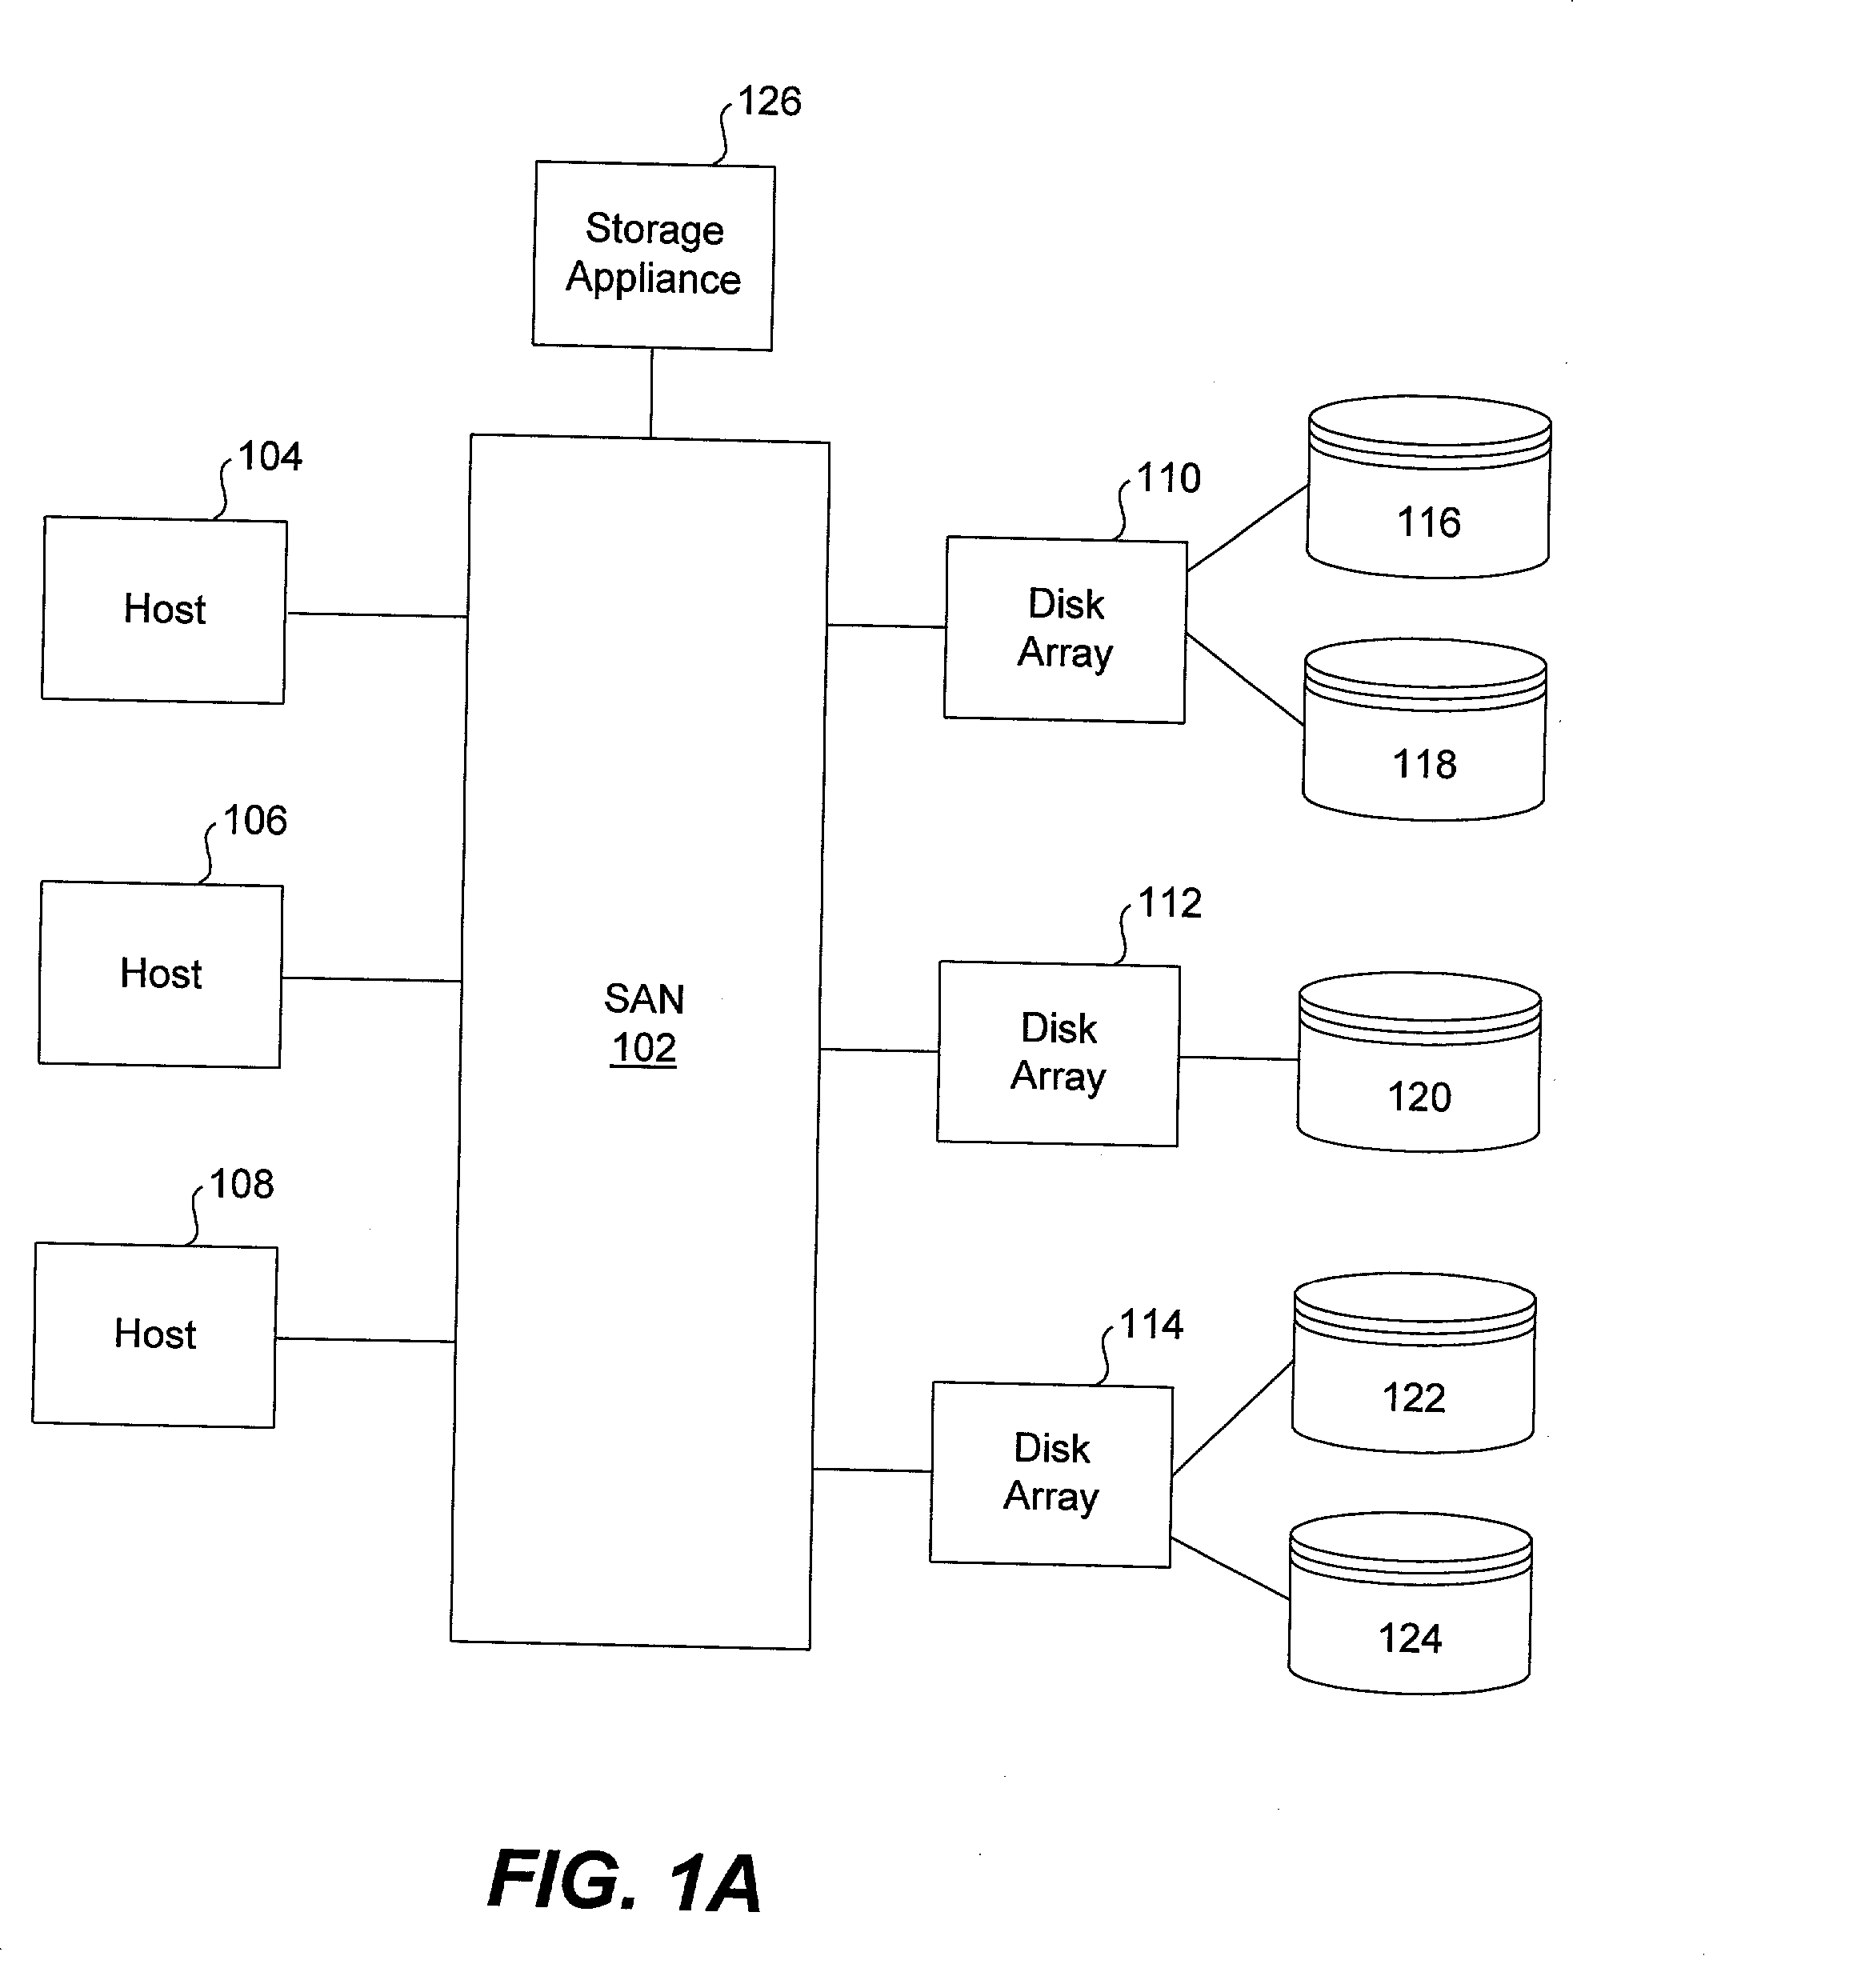 Methods and apparatus for implementing virtualization of storage within a storage area network